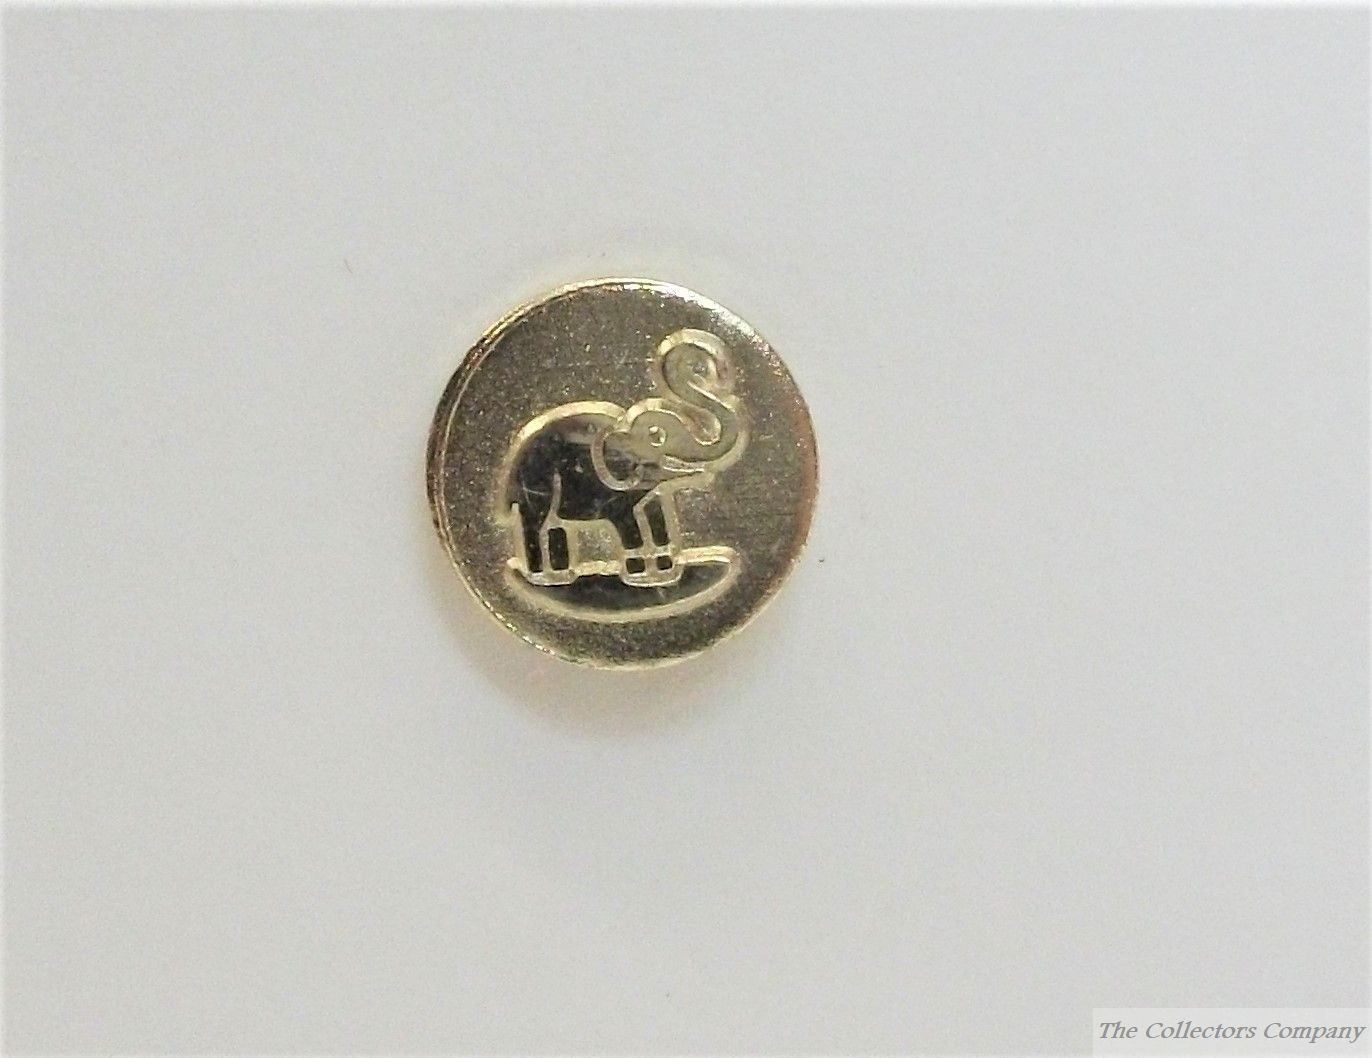 Steiff branded Lapel or Tie Pin 92700 1cm / 0.3 inches